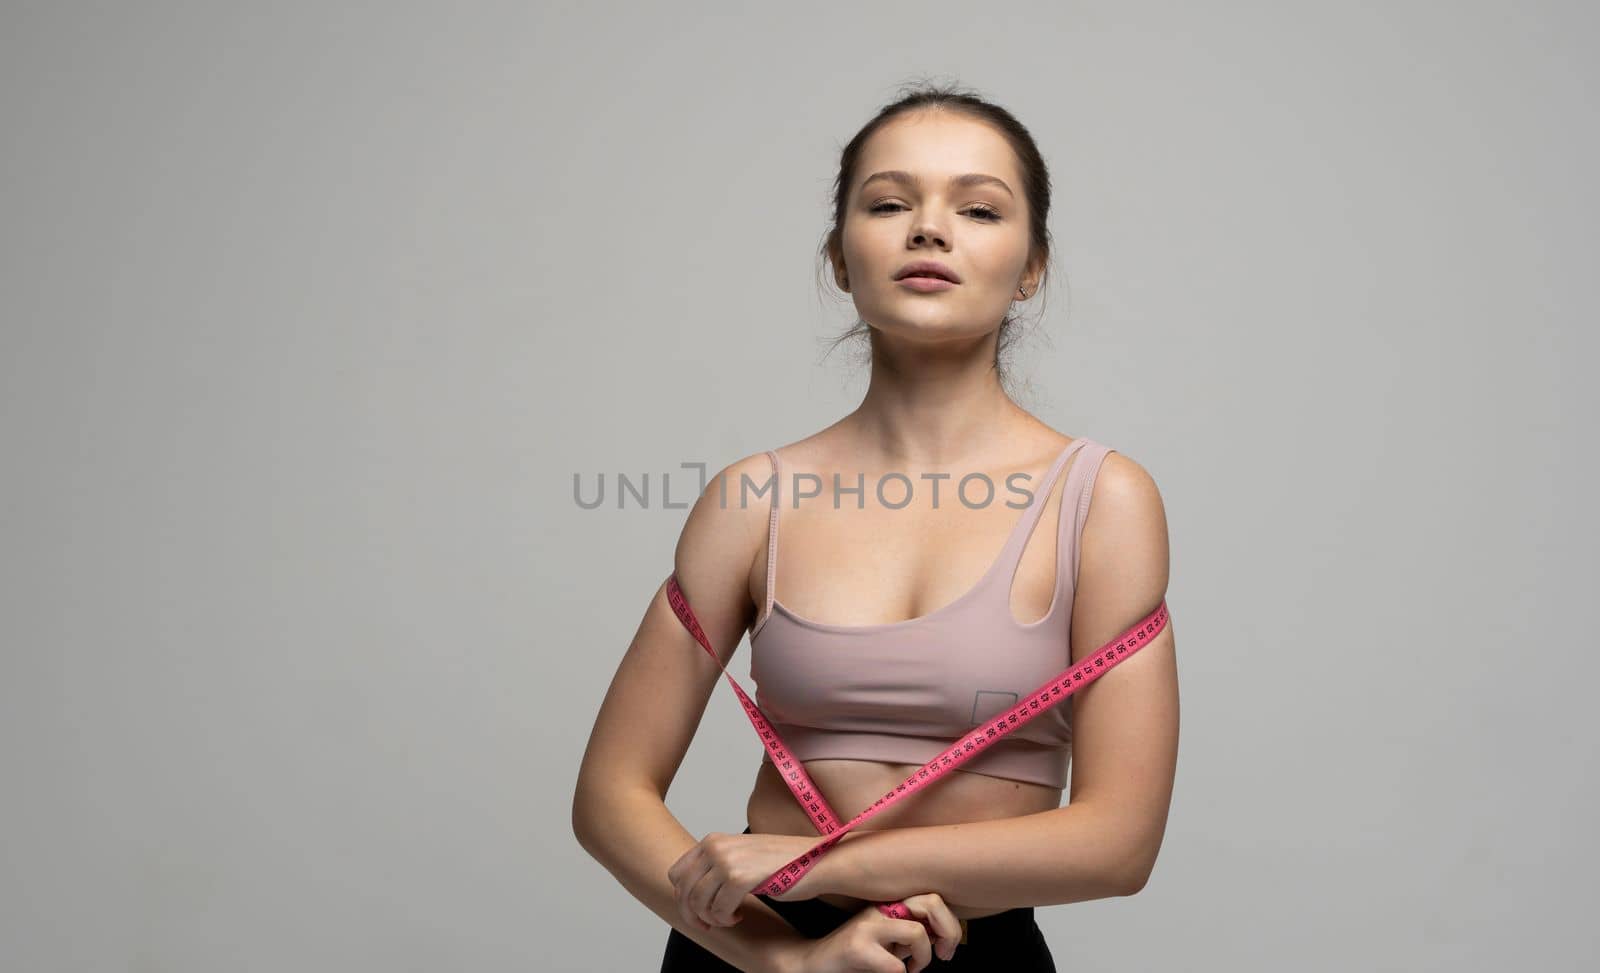 Brunette woman in sport outfit sportswear holding a pink measuring tape. Weight loss and diet concepts. Health care and healthy nutrition. Perfect slim body